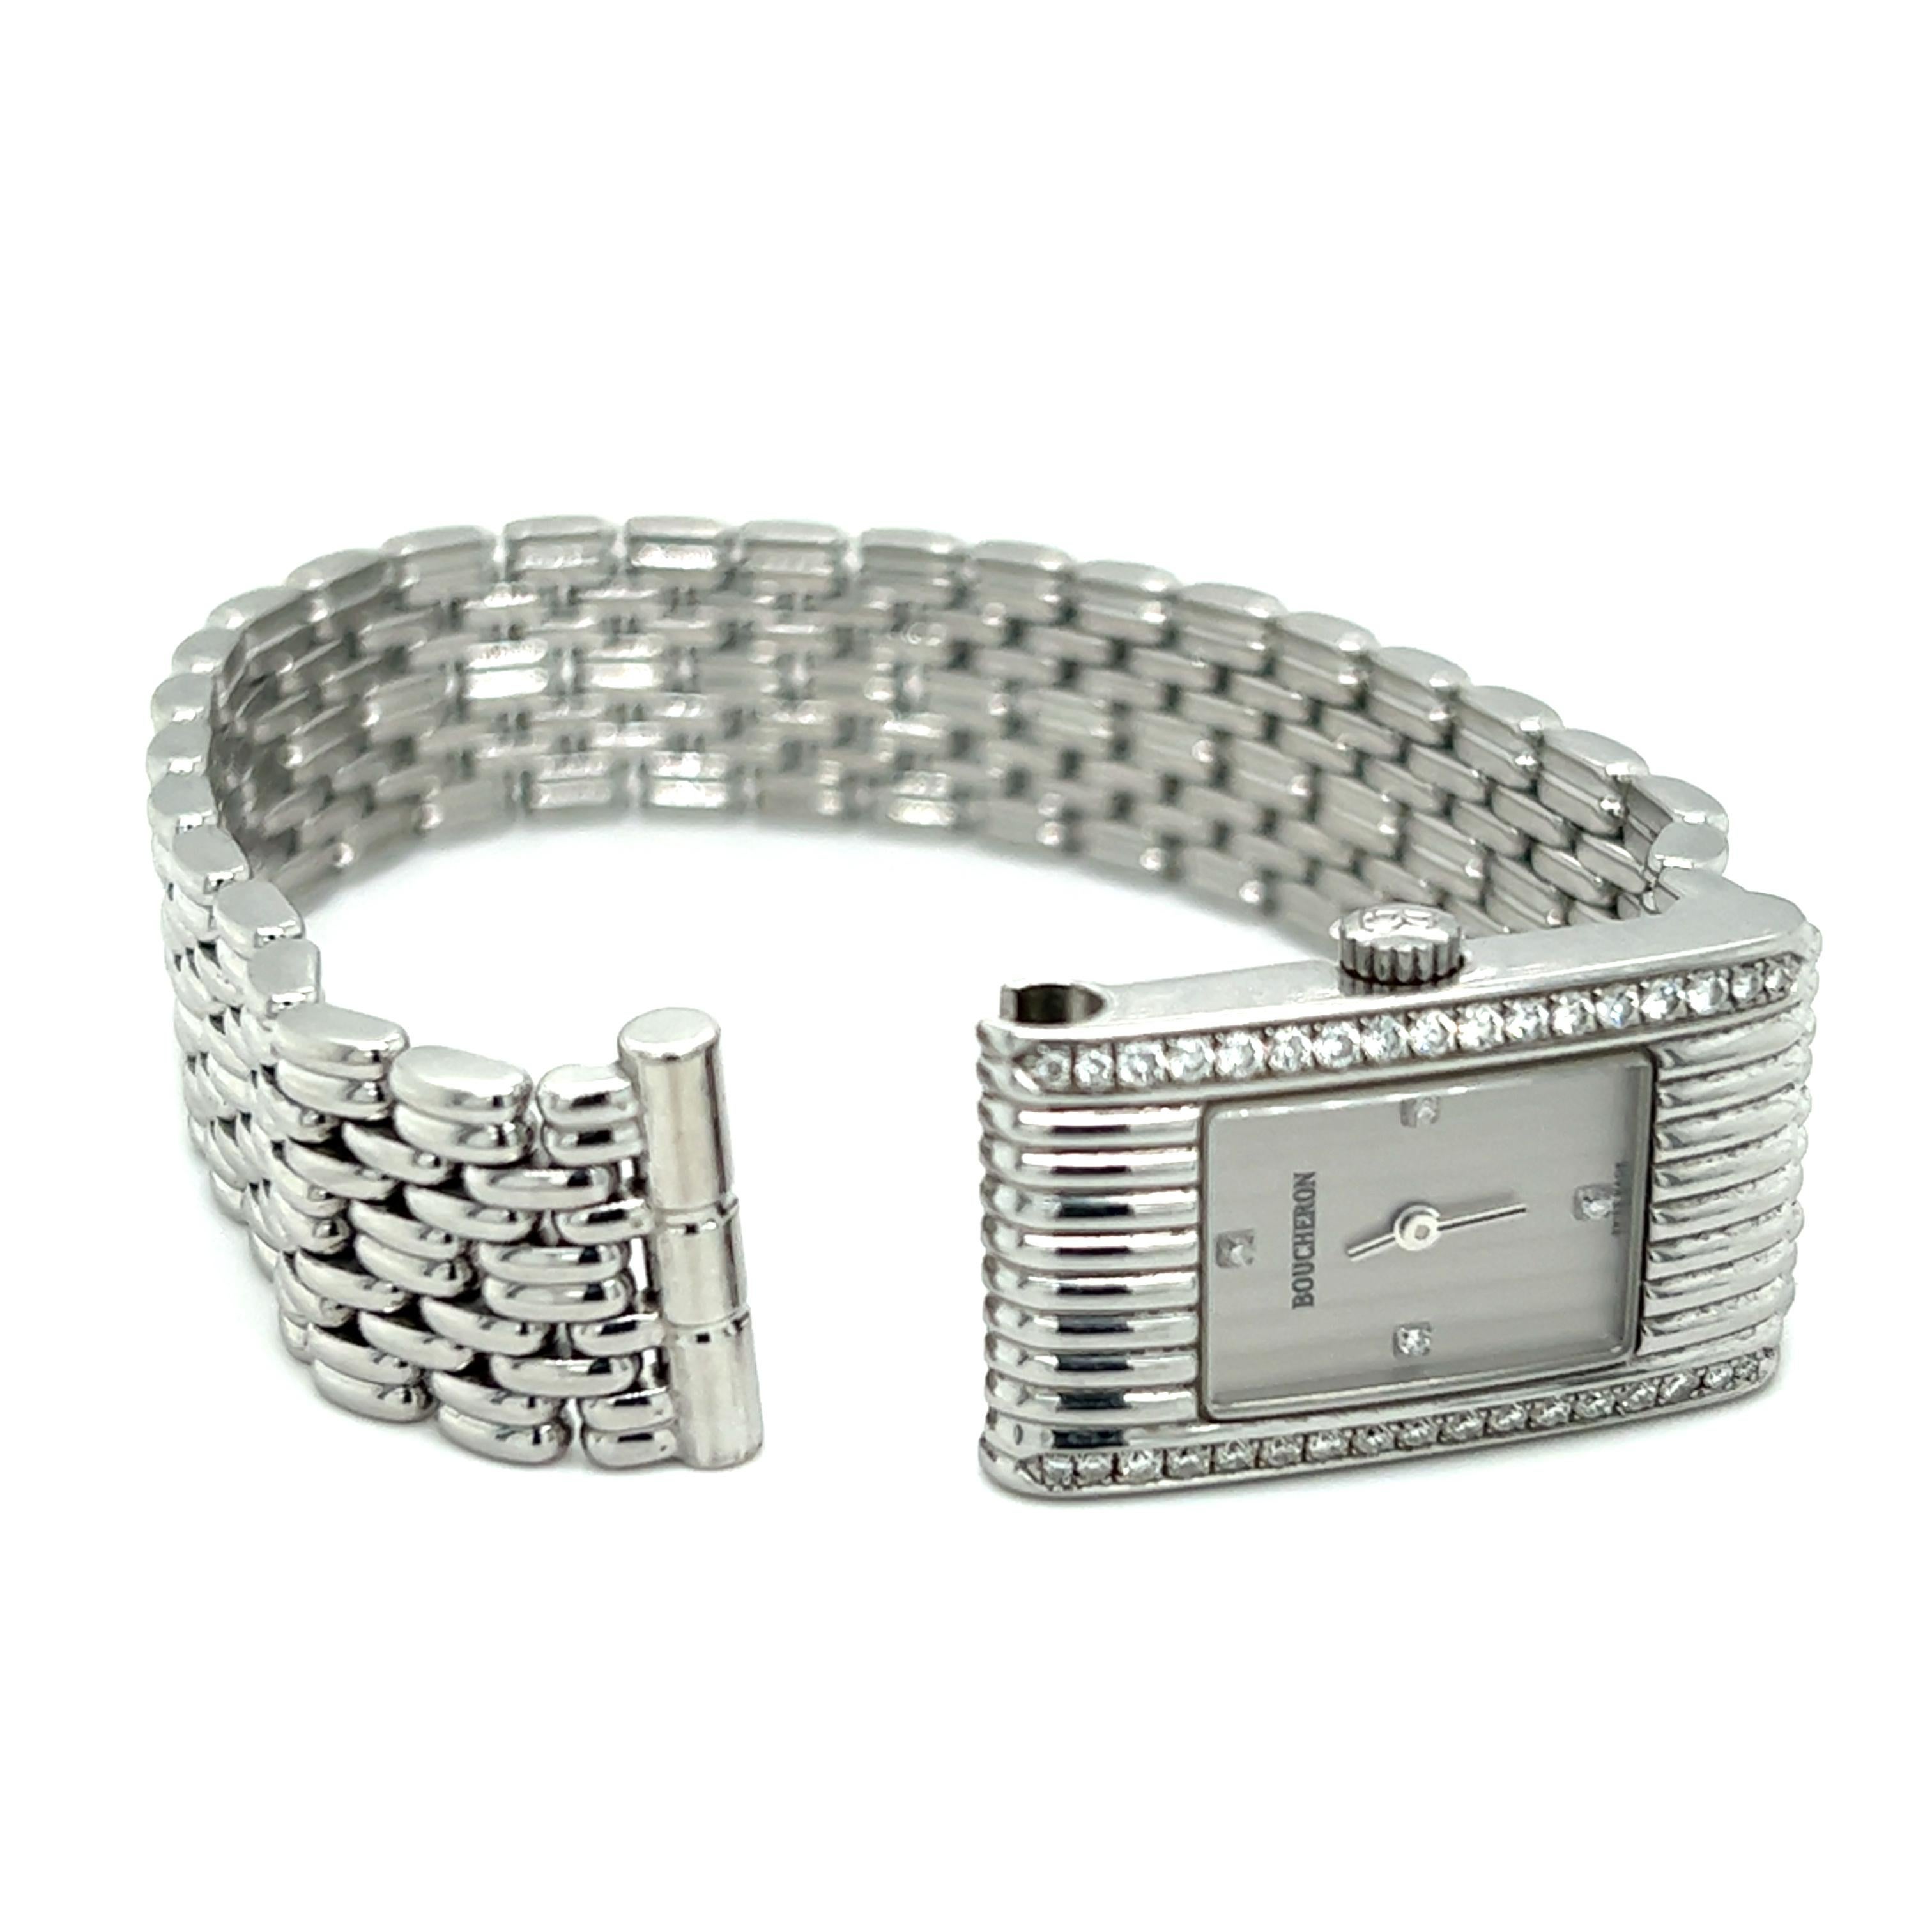  One woman's Swiss-made Stainless Steel quartz Boucheron Reflect watch set with thirty-eight round brilliant cut diamonds, approximately 0.50-carat total weight with matching G/H color and SI1 clarity. The stainless steel bracelet measures 25.00mm